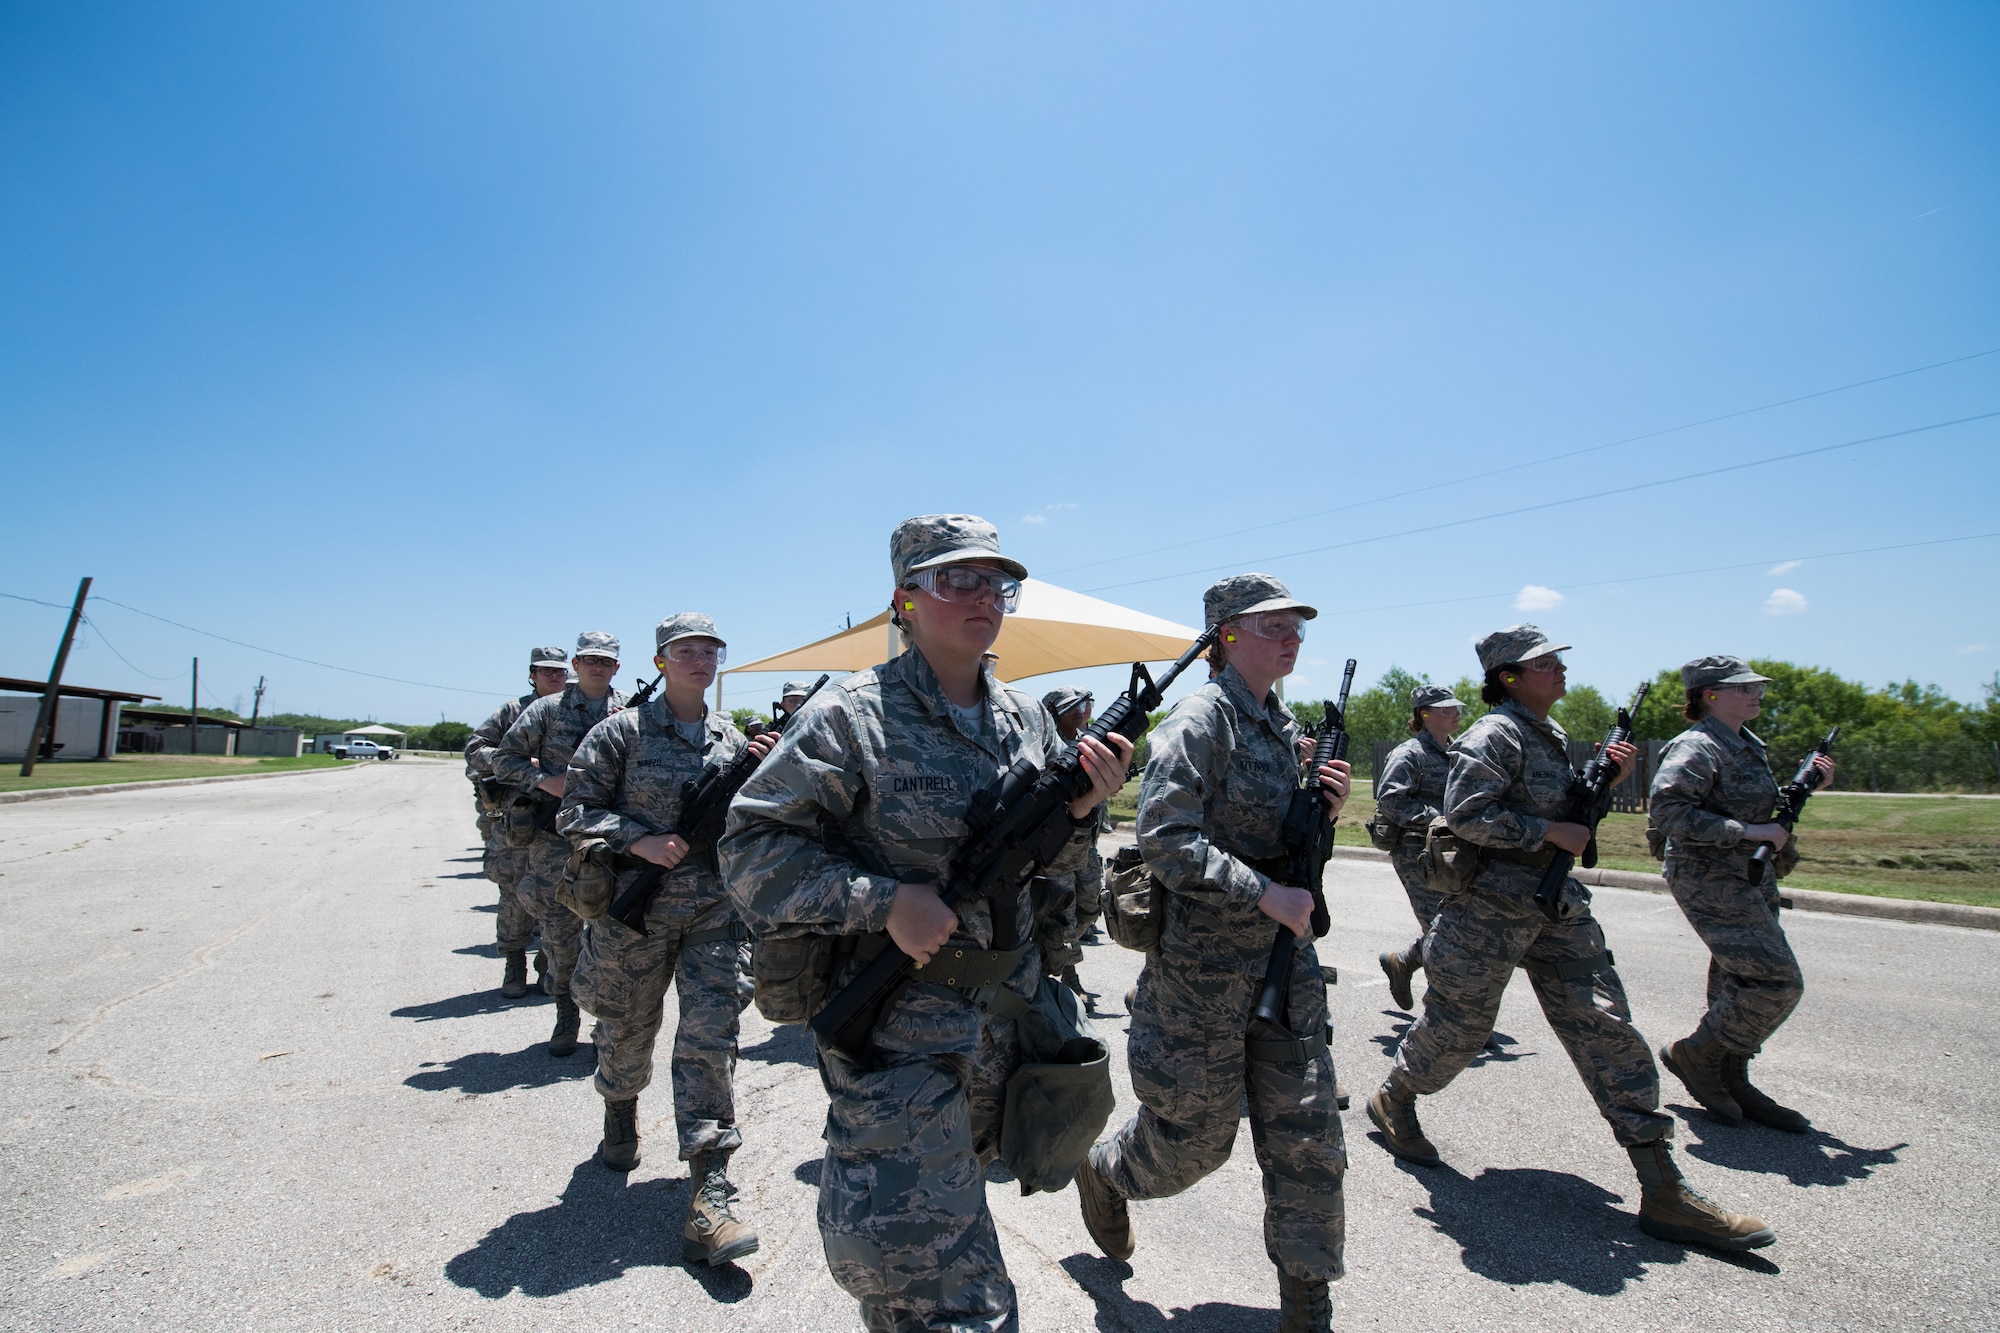 U.S. Air Force basic training trainees march back from the firing range after a weapons familiarization course, June 8, 2019, at Joint Base San Antonio-Medina Annex. BMT trainees were the first to experience M-4 Carbine Weapons Familiarization Course at the new facility, which closed in November 2018, due to improper rainwater drainage. The firing range allows instructors to train 244 BMT trainees daily, four days a week, qualifying more than 40,000 BMT trainees in the M-4 carbine annually. (U.S. Air Force photo by Sarayuth Pinthong)